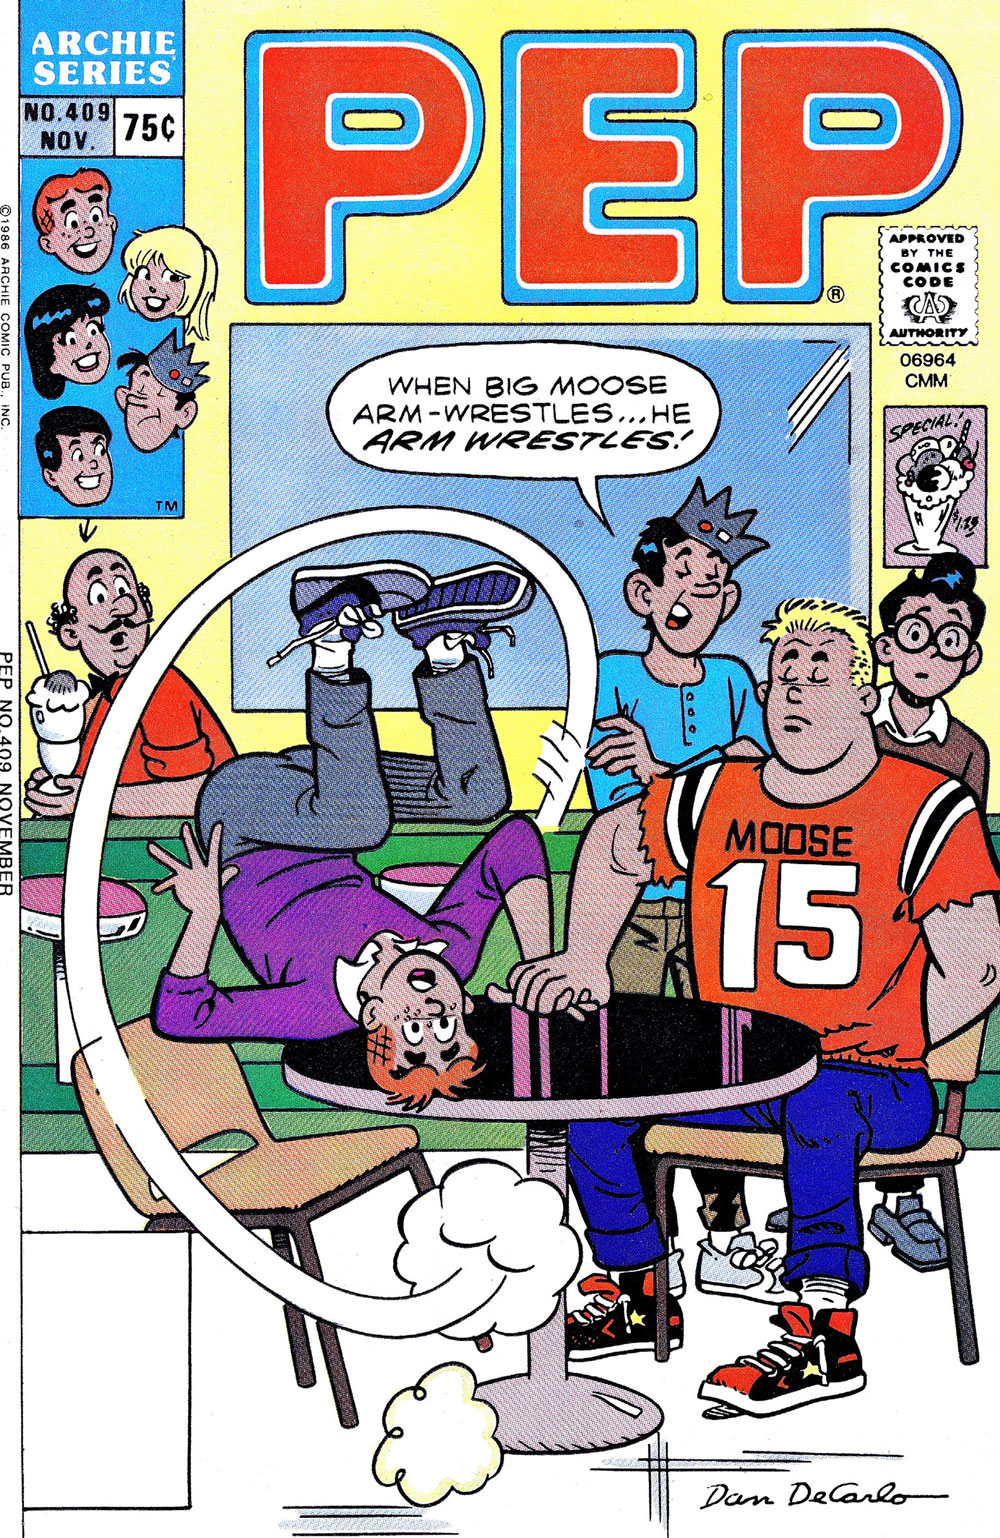 Moose and Archie are arm wrestling at Pop's diner, and Moose has flipped Archie over completely on his head. Jughead says when Big Moose arm wrestles, he really arm wrestles.